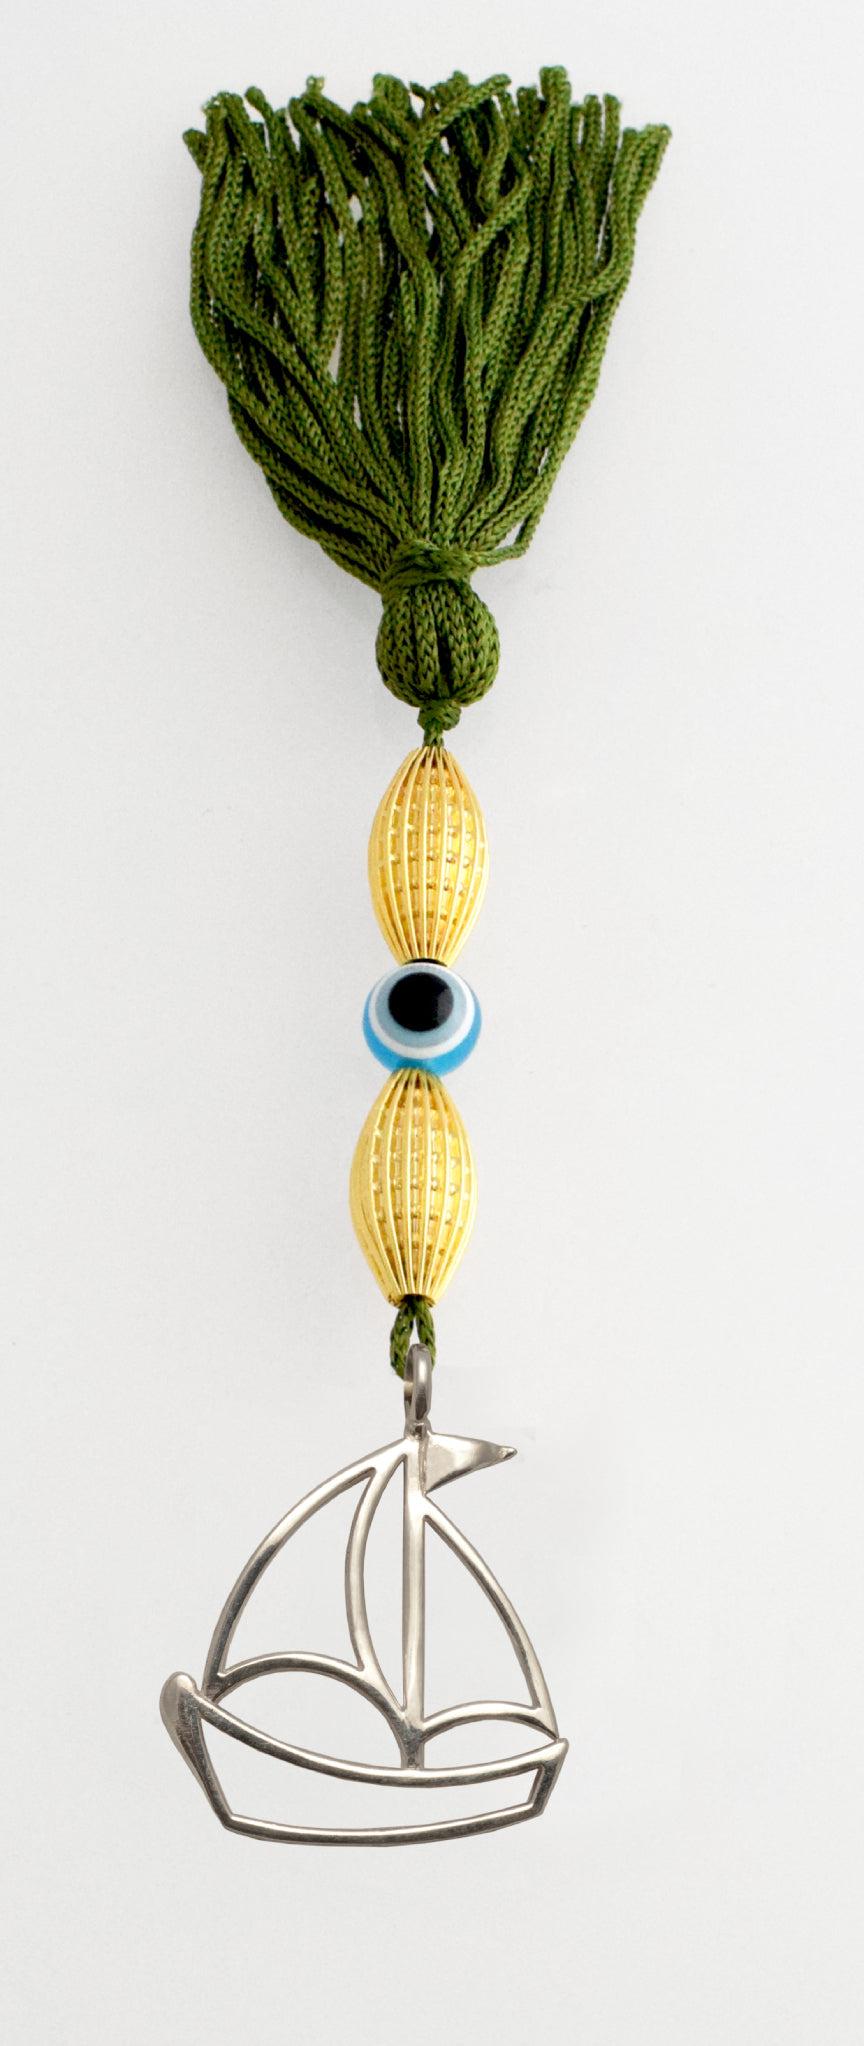 Evil Eye Charm on a tassel, House decoration, holiday decor, welcome gift, silver charm, Sailboat Charm